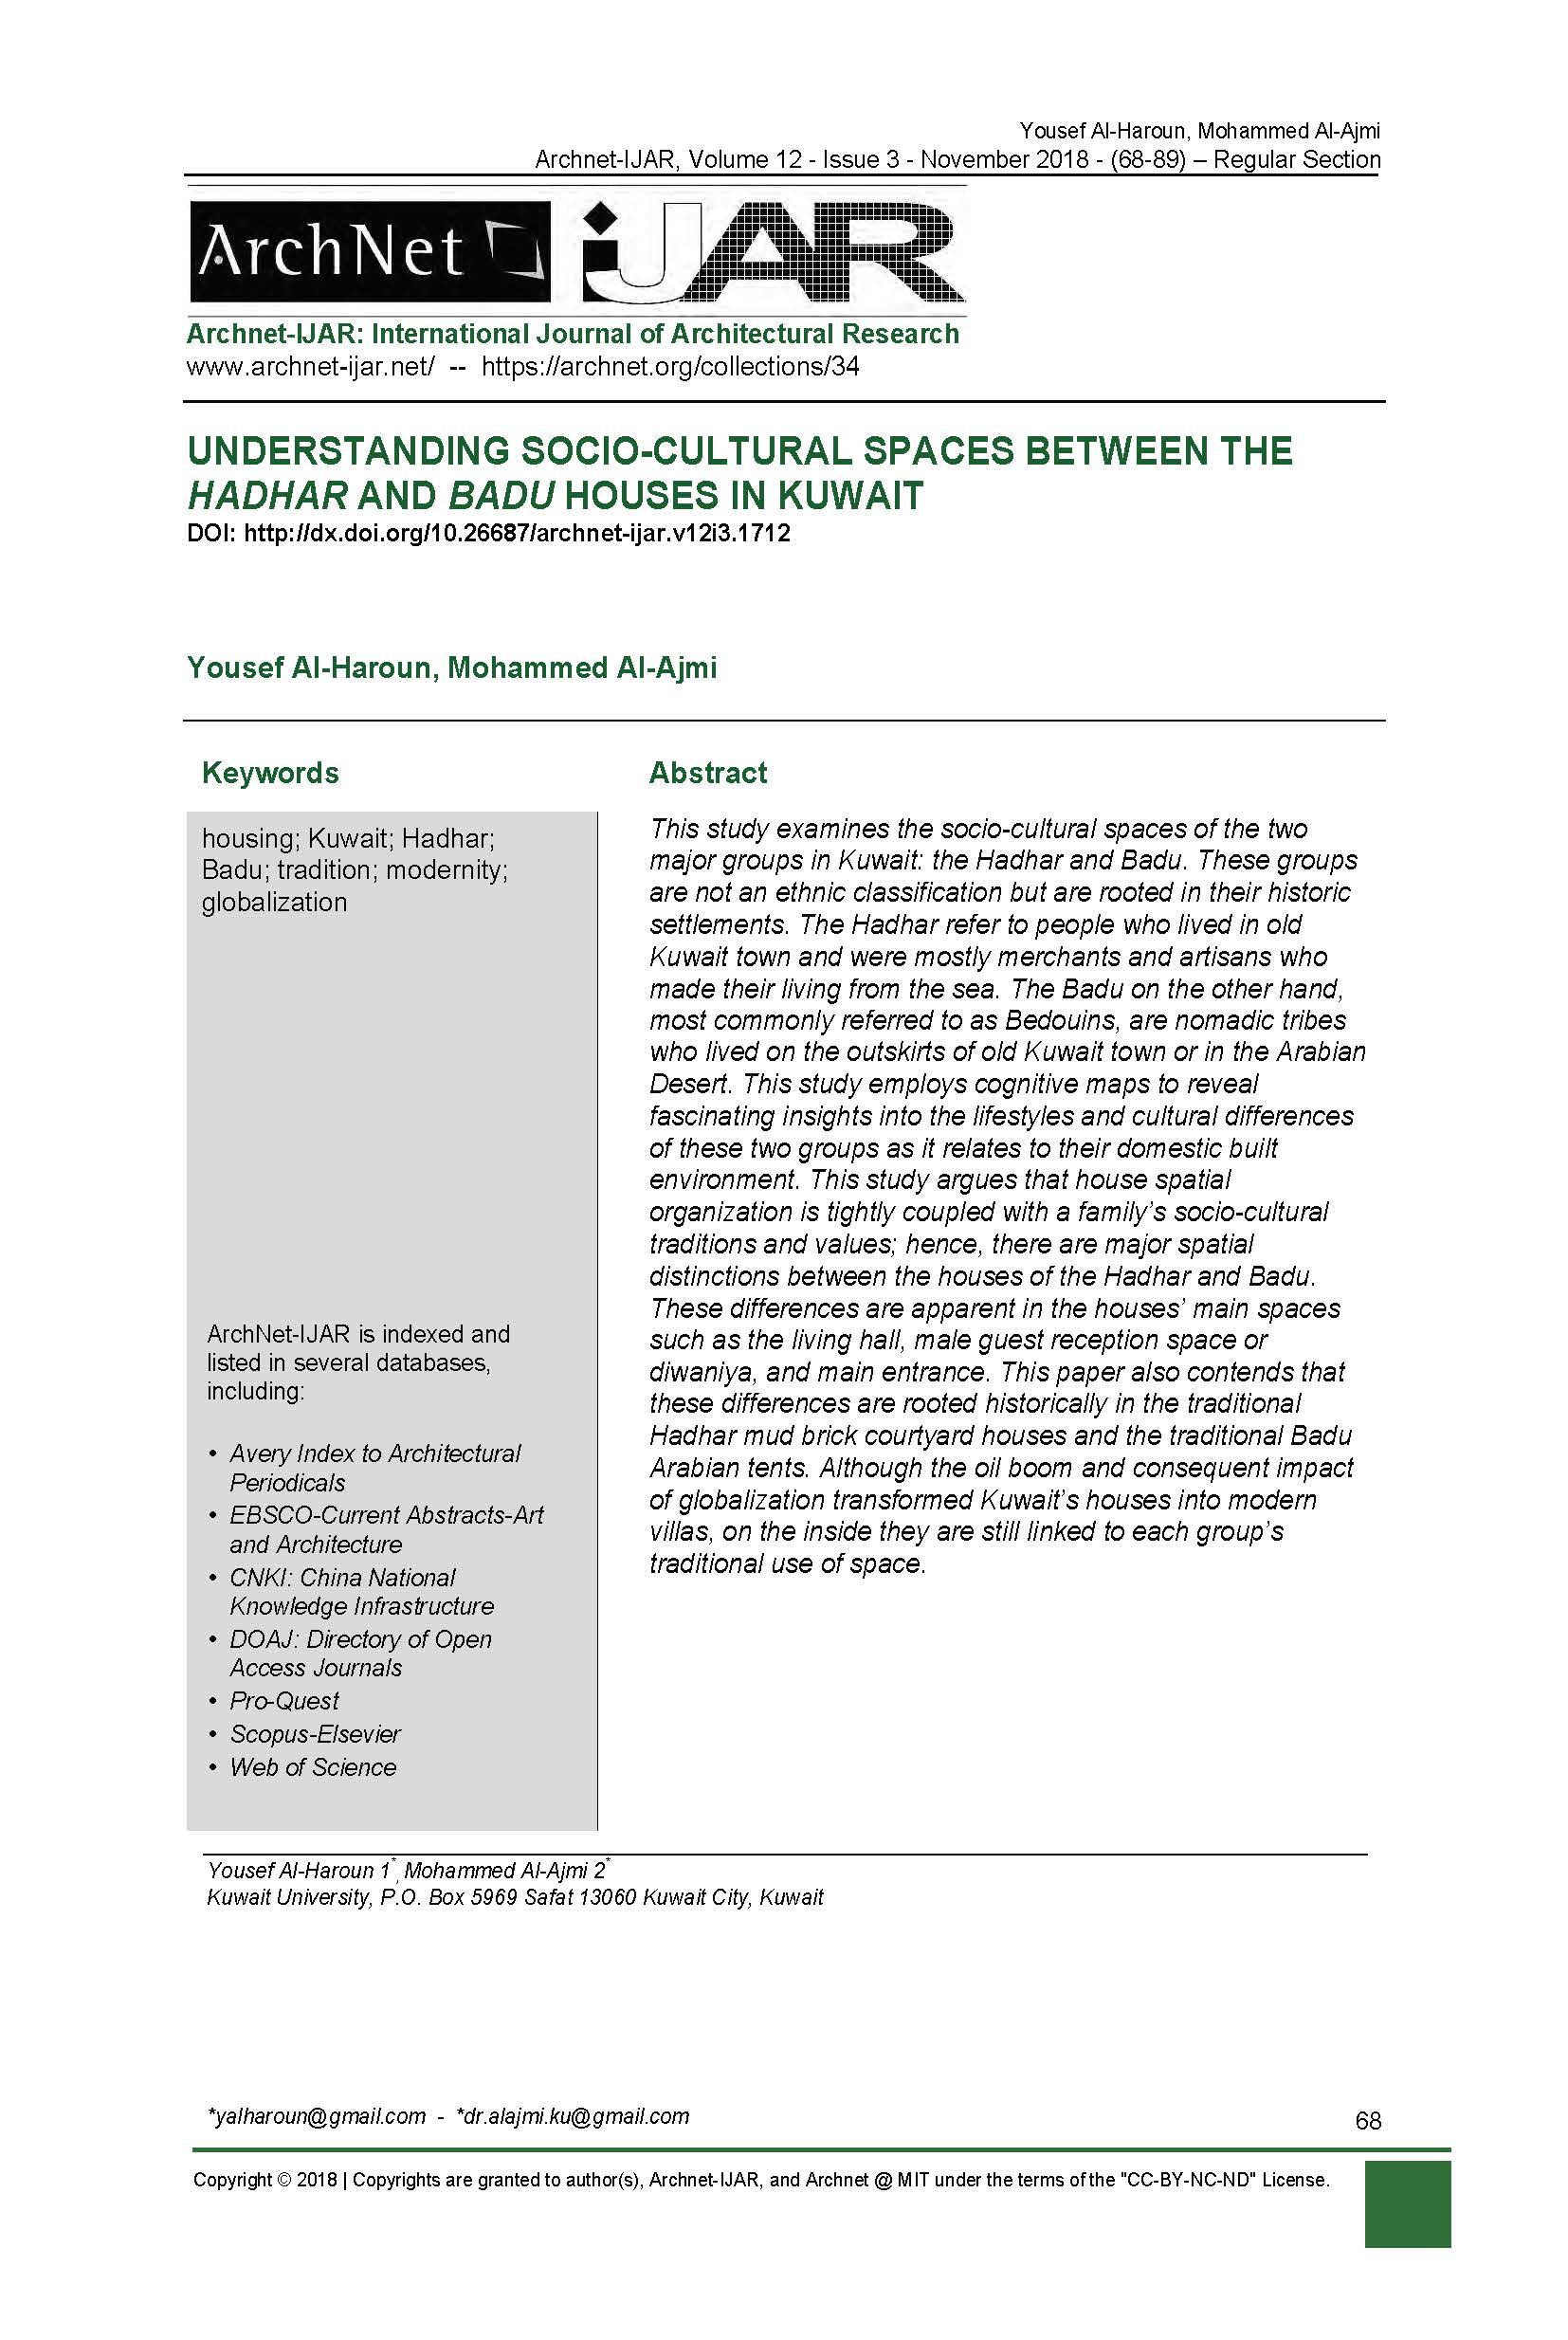 Yousef AbdulMohsen al-Haroun - <div style="text-align: justify;">This study examines the socio-cultural spaces of the two major groups in Kuwait: the Hadhar and Badu. These groups are not an ethnic classification but are rooted in their historic settlements. The Hadhar refer to people who lived in old Kuwait town and were mostly merchants and artisans who made their living from the sea. The Badu on the other hand, most commonly referred to as Bedouins, are nomadic tribes who lived on the outskirts of old Kuwait town or in the Arabian Desert. This study employs cognitive maps to reveal fascinating insights into the lifestyles and cultural differences of these two groups as it relates to their domestic built environment. This study argues that house spatial organization is tightly coupled with a family’s socio-cultural traditions and values; hence, there are major spatial distinctions between the houses of the Hadhar and Badu. These differences are apparent in the houses’ main spaces such as the living hall, male guest reception space or diwaniya, and main entrance. This paper also contends that these differences are rooted historically in the traditional Hadhar mud brick courtyard houses and the traditional Badu Arabian tents. Although the oil boom and consequent impact of globalization transformed Kuwait’s houses into modern villas, on the inside they are still linked to each group’s traditional use of space.<br></div>